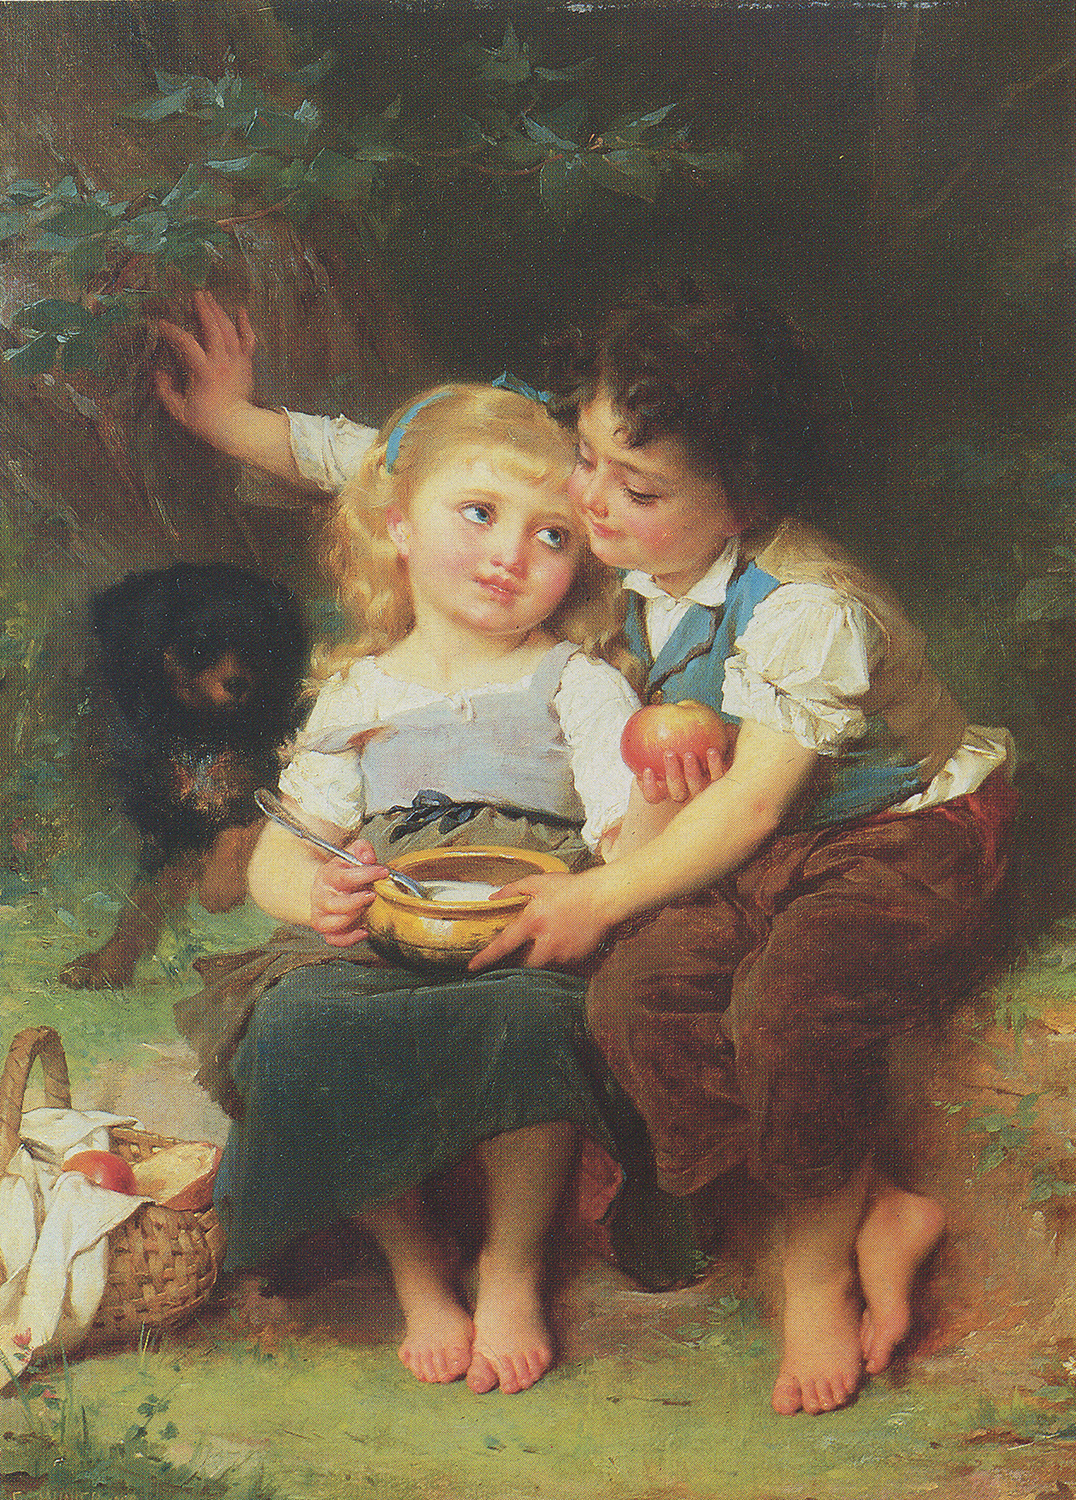 2 children eating with a dog by their side